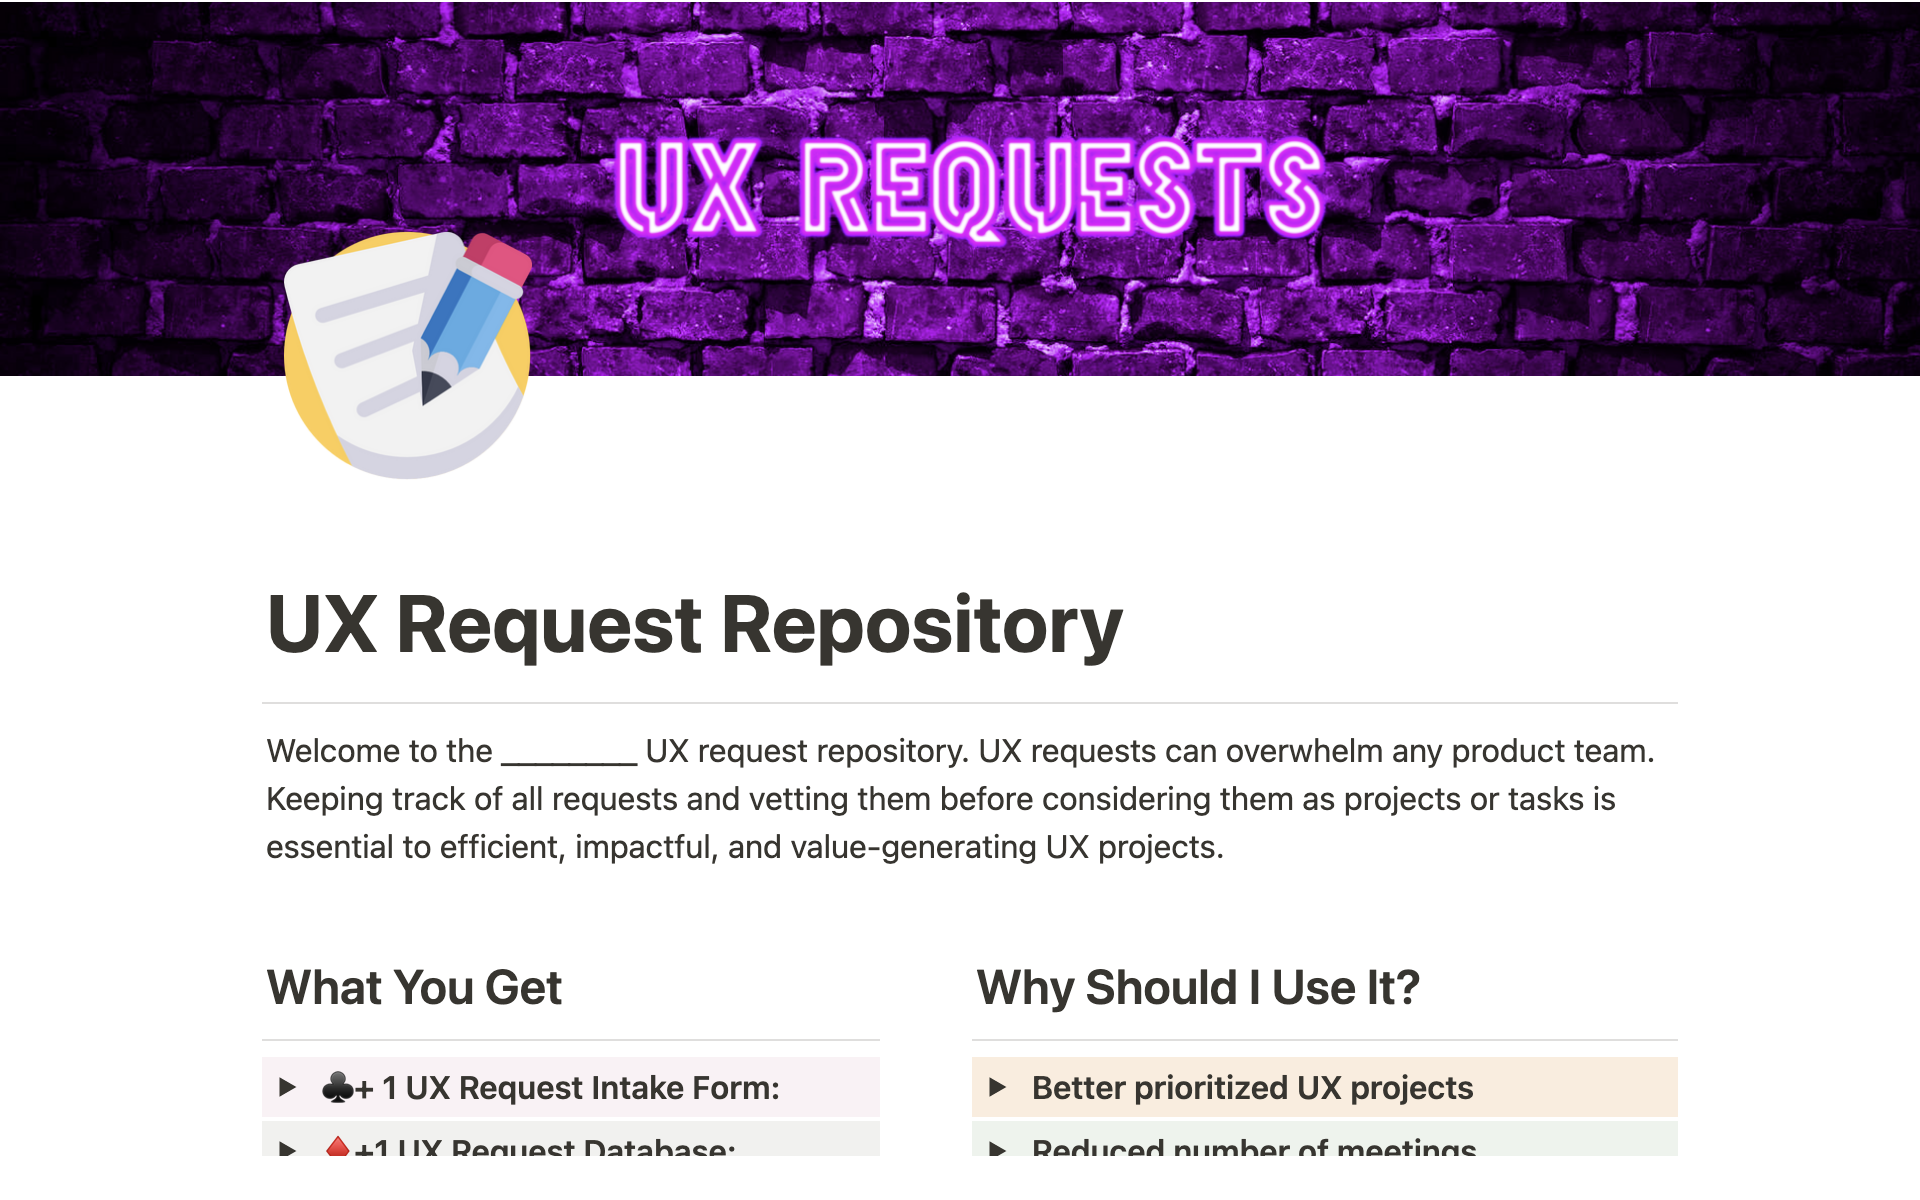 This Notion repository allows product teams to take, track, and evaluate UX requests before allocating resources.